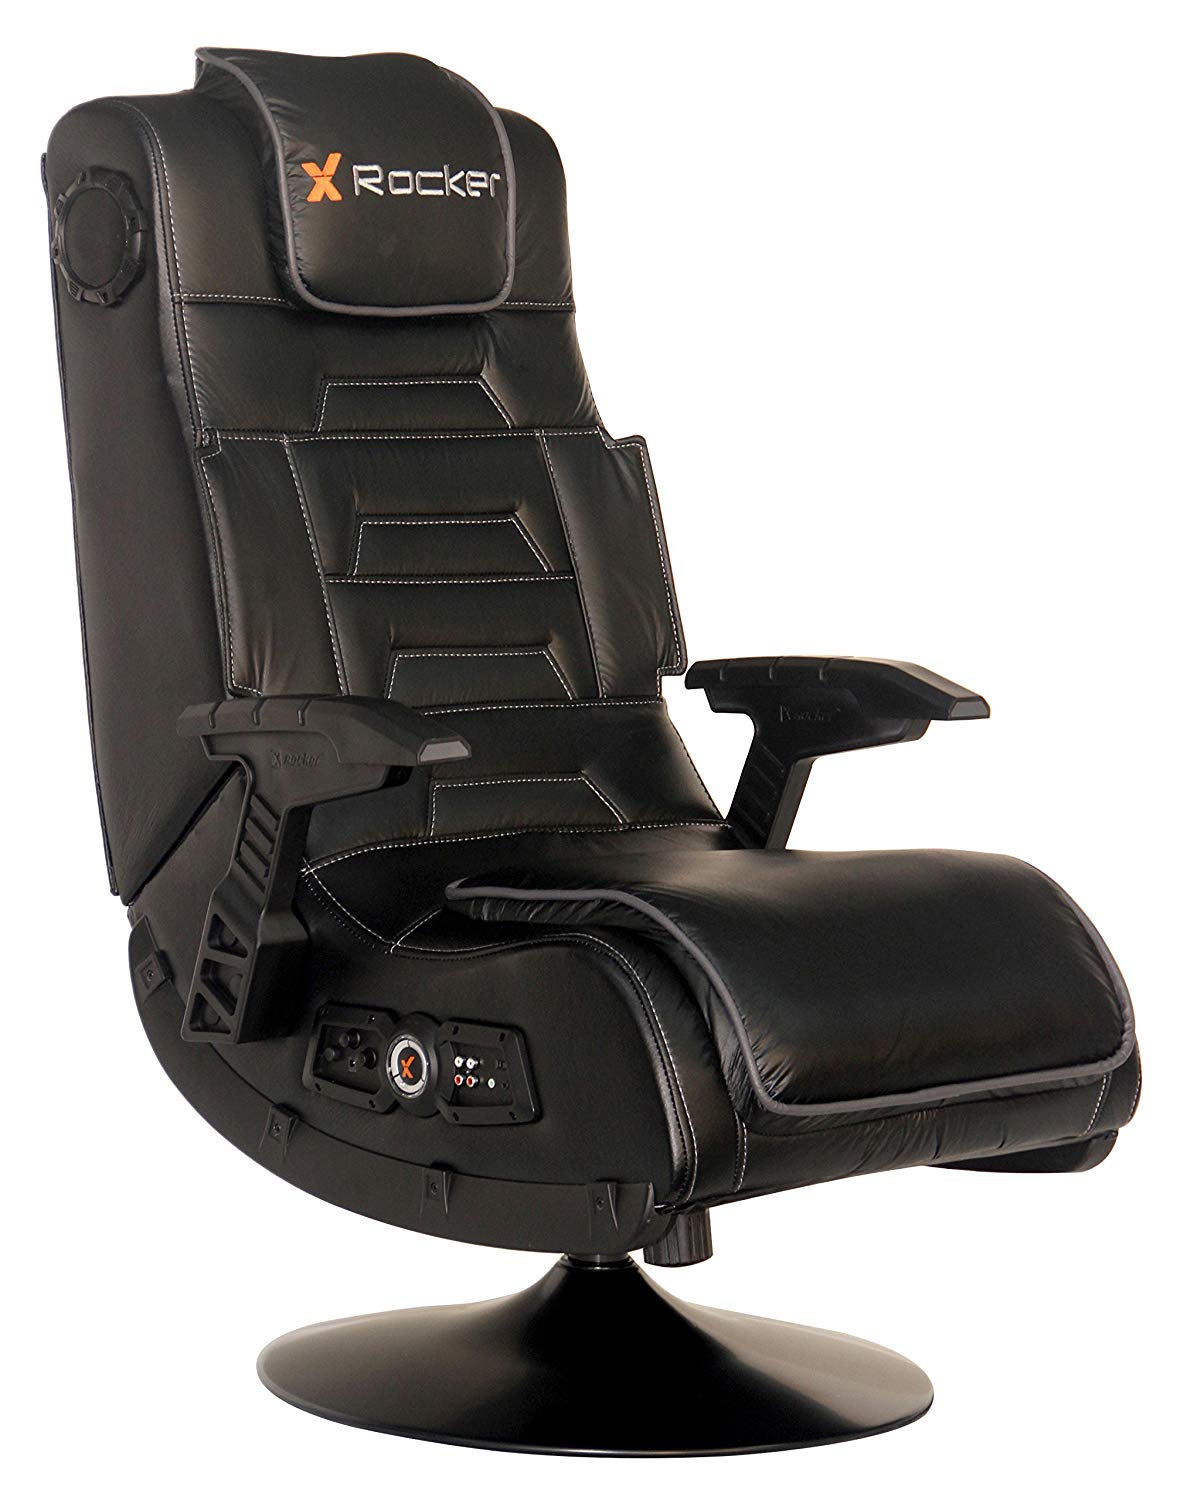 Best Gaming Chairs for Adults - The Top Chair Reviews (2018)